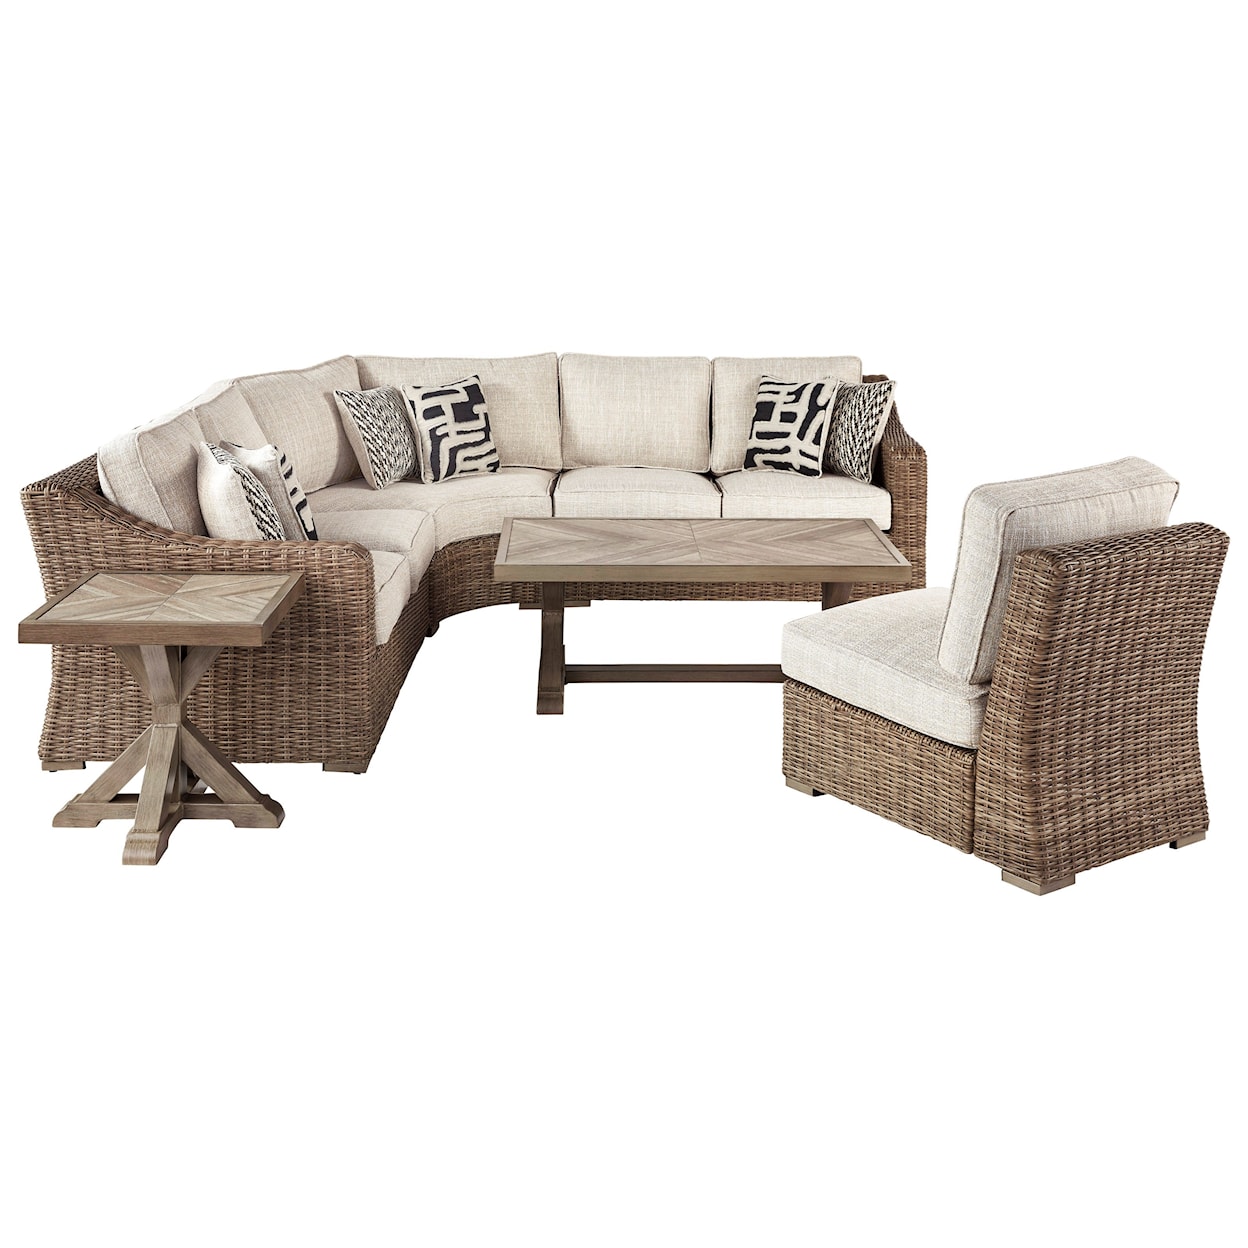 Signature Design by Ashley Beachcroft 3 Piece Sectional